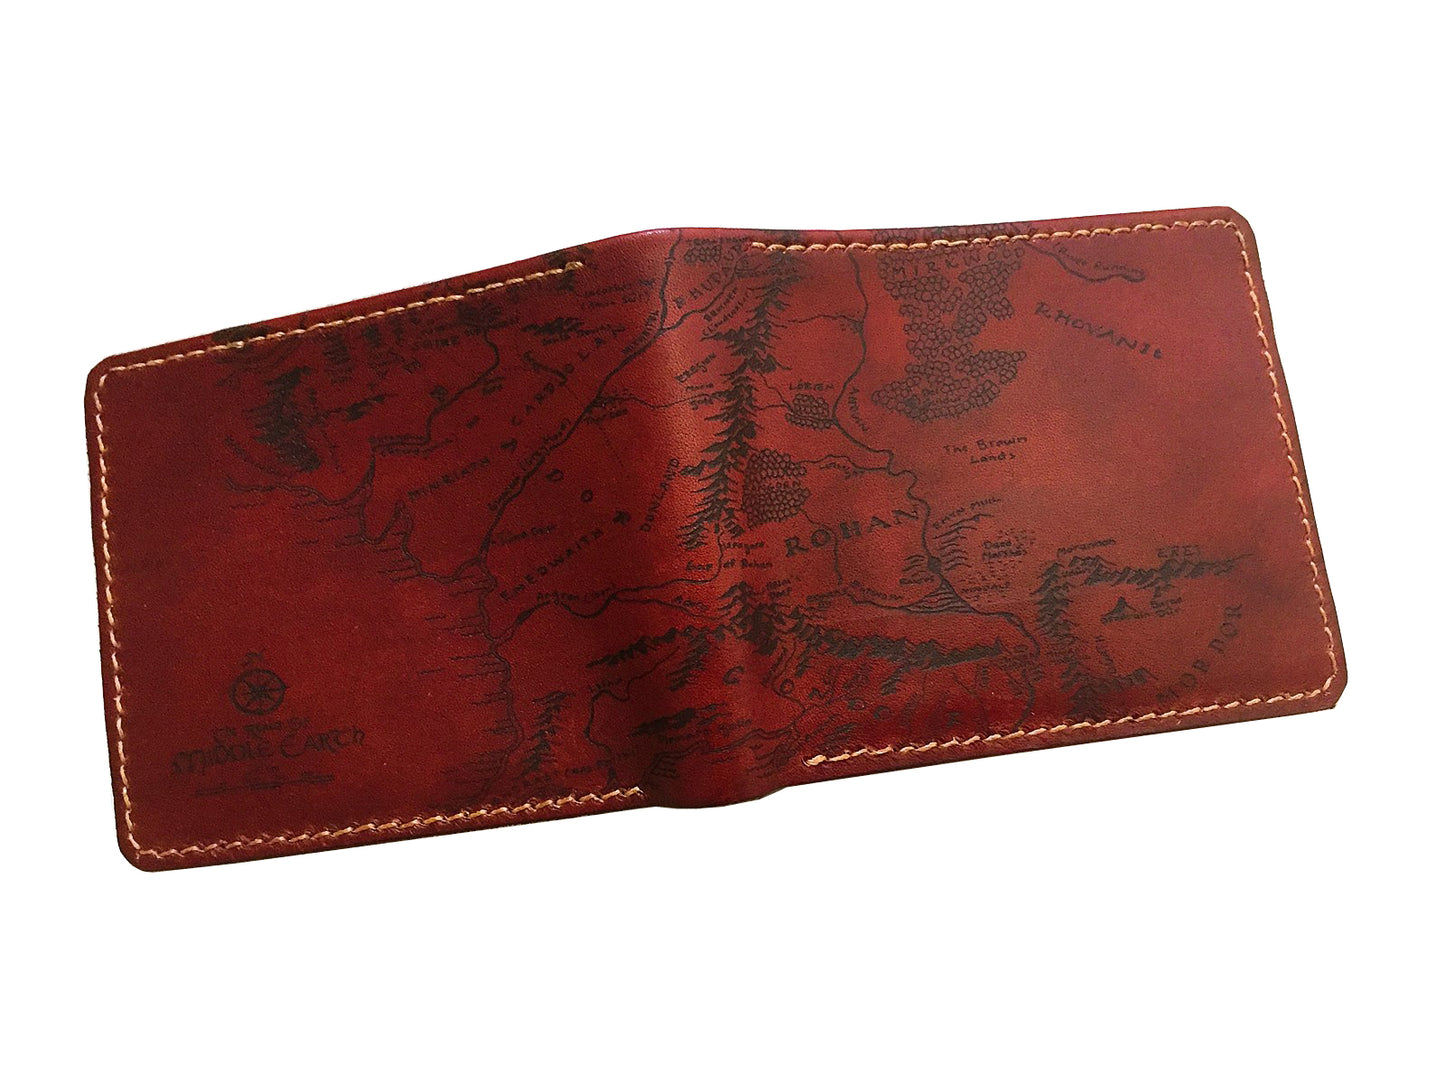 Mayan Corner - The Lord of the Rings middle Earth map men's wallet, men's gift, personalized gift for him, father boyfriend husband anniversary present